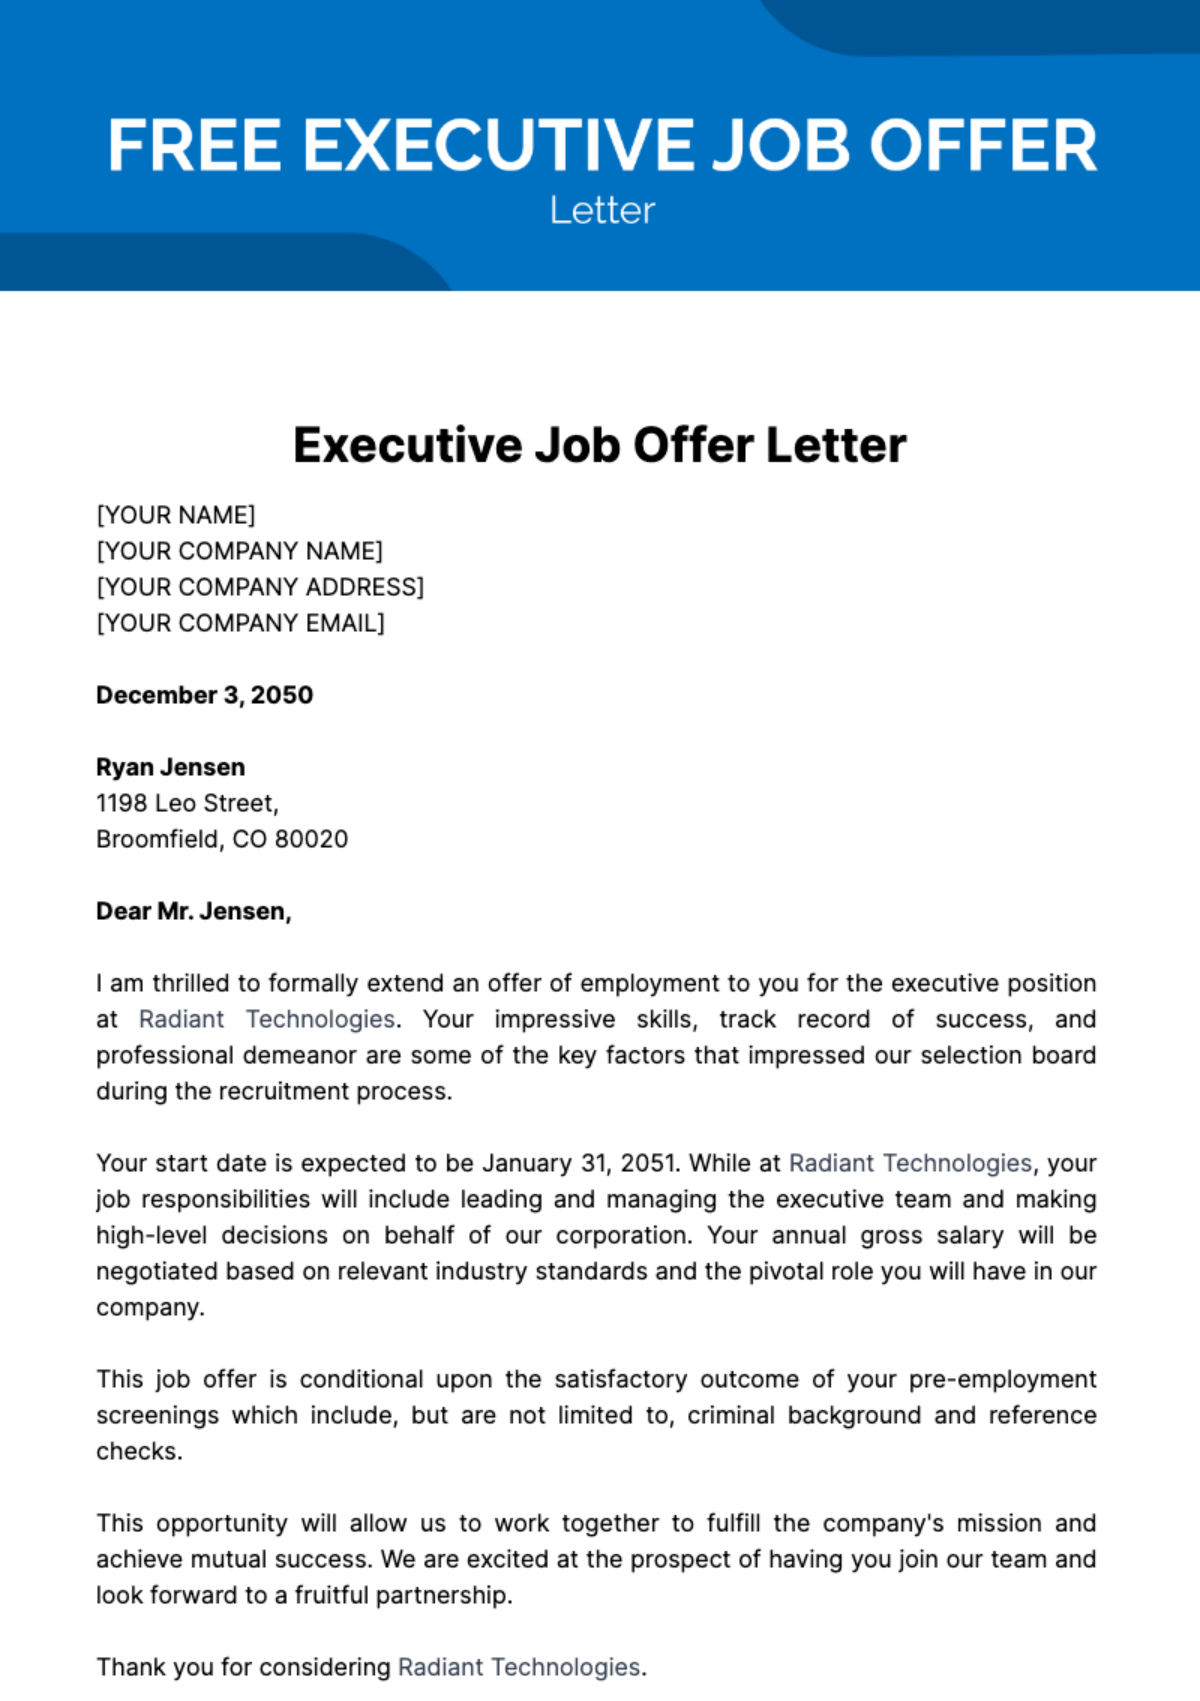 Free Executive Job Offer Letter Template